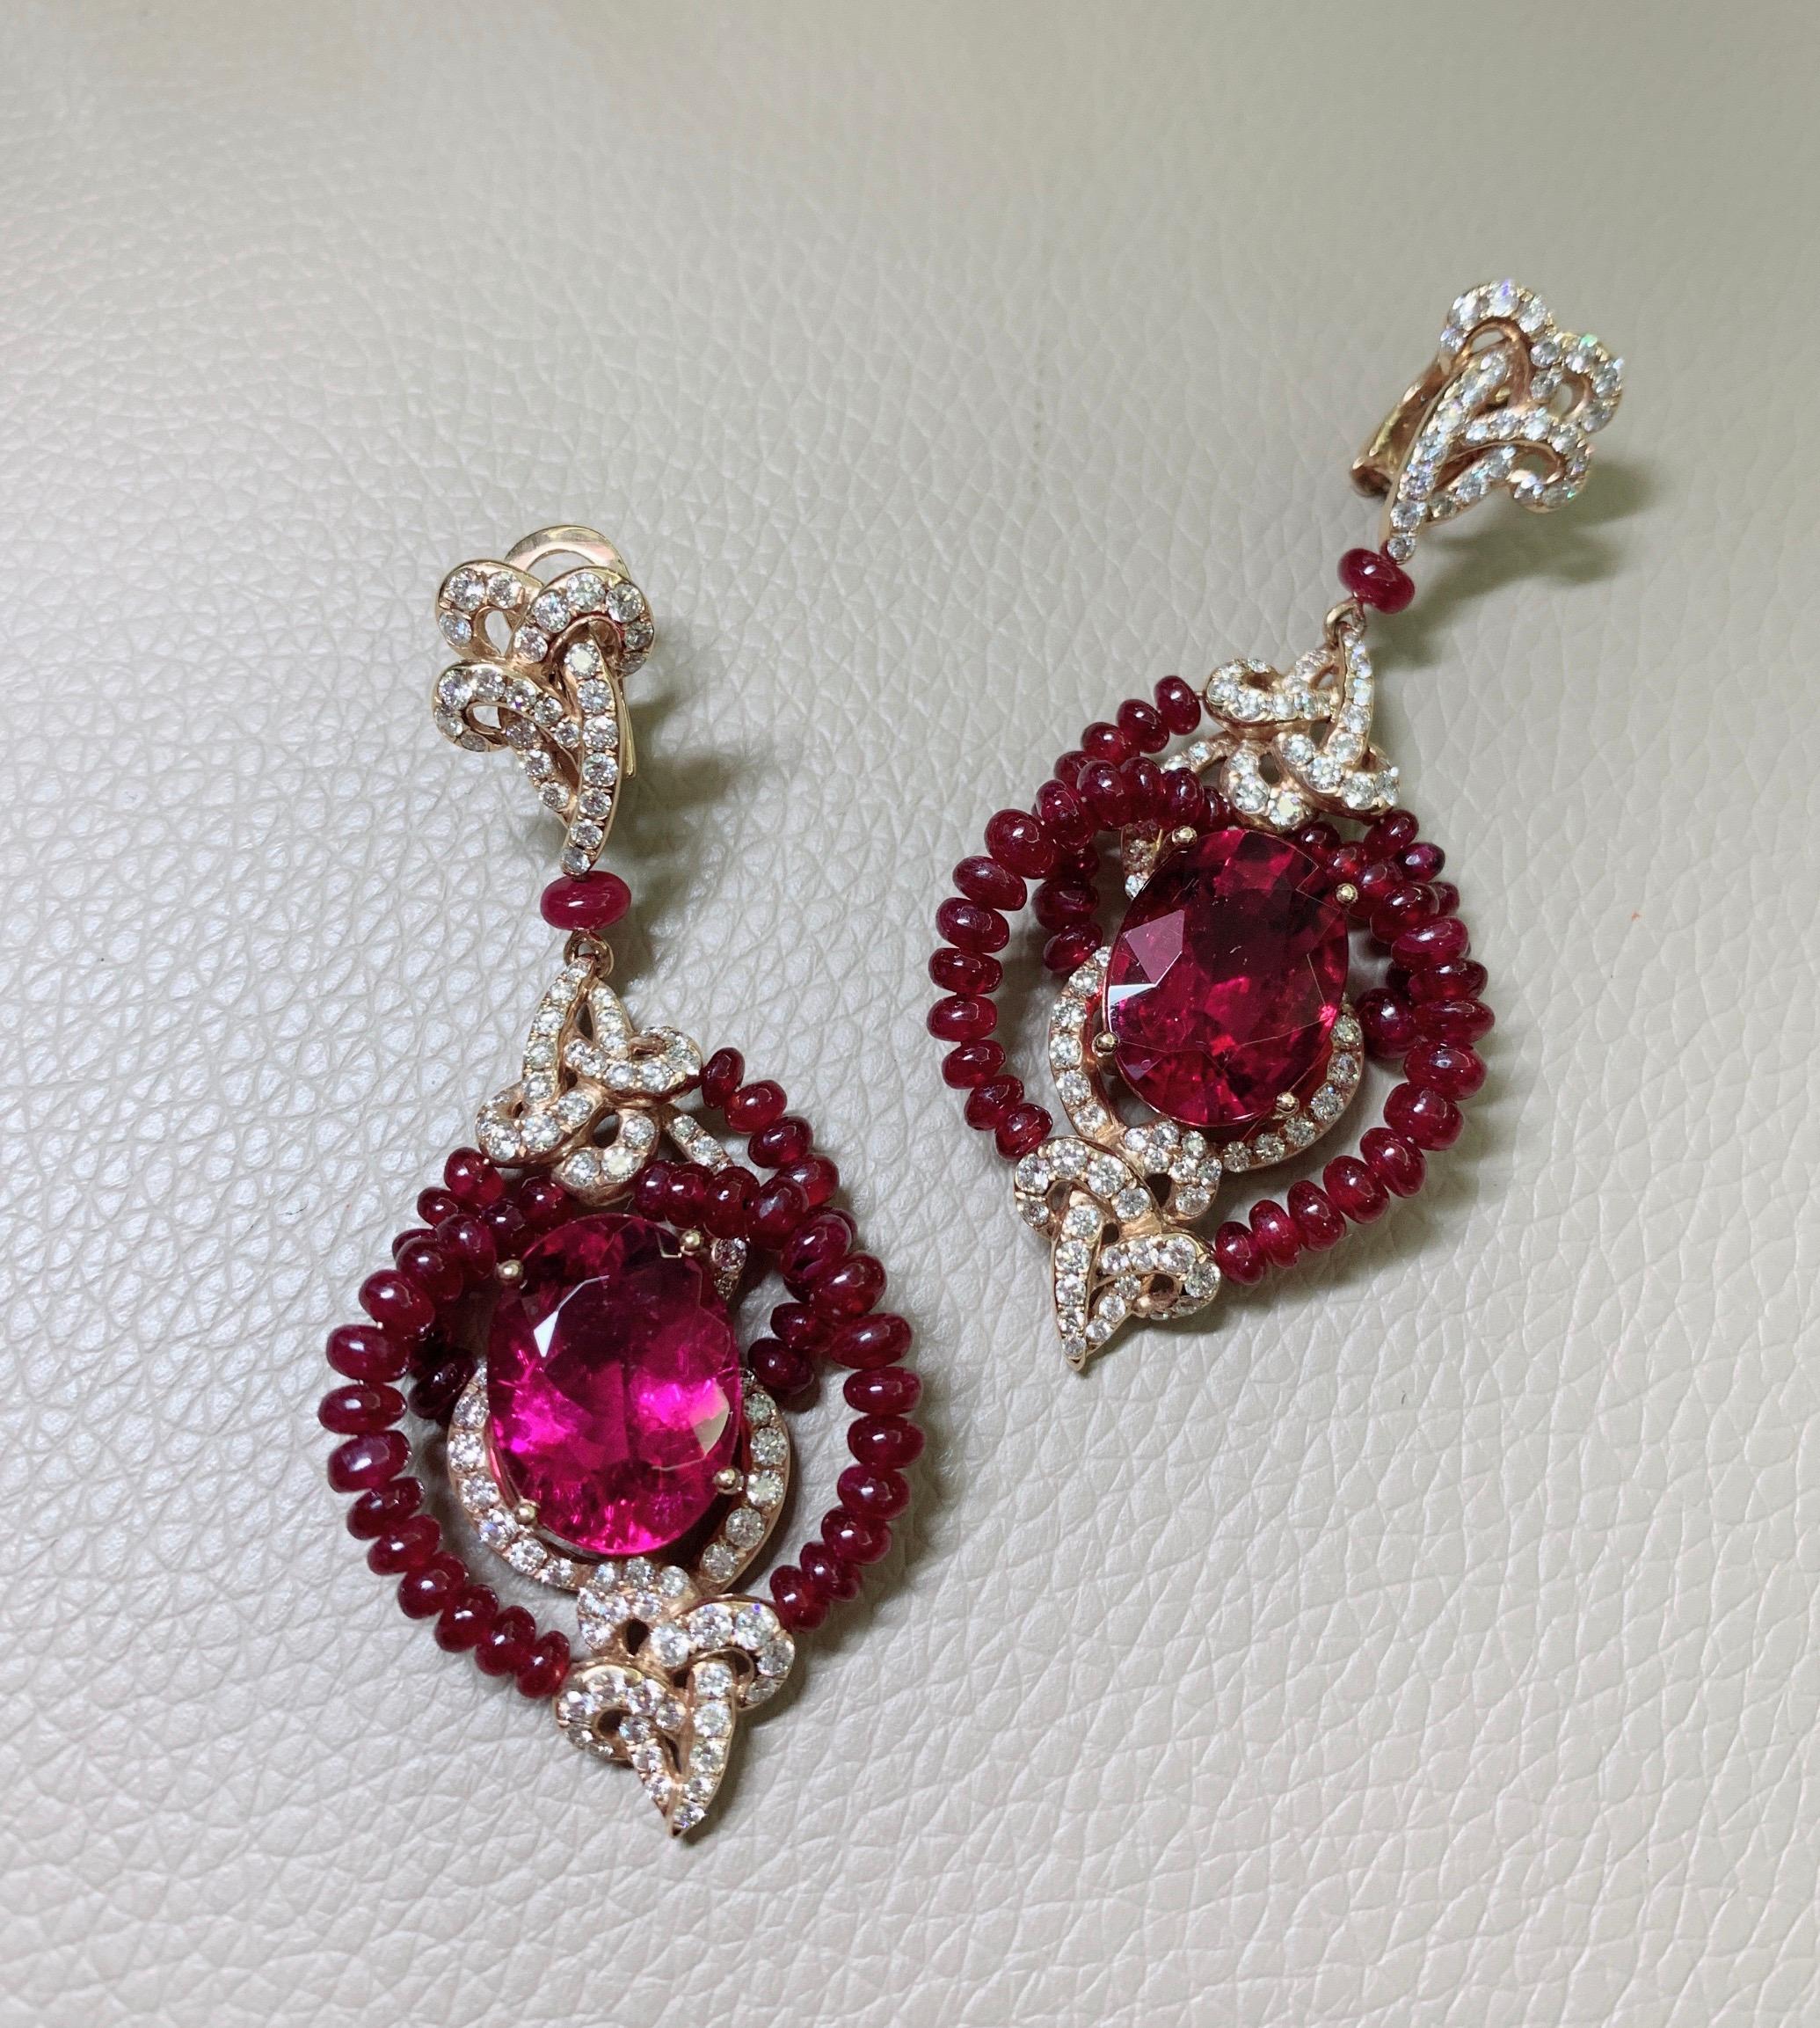 This pair of earring feature with a total 15 ct rubelite oval shape in center. surrounded with natural ruby beads and  white diamond design in 18k rose gold. 

Details information 
188 pcs, white diamond 2.98ct 
84 pcs, ruby beads 24.48ct 
2 pcs, 